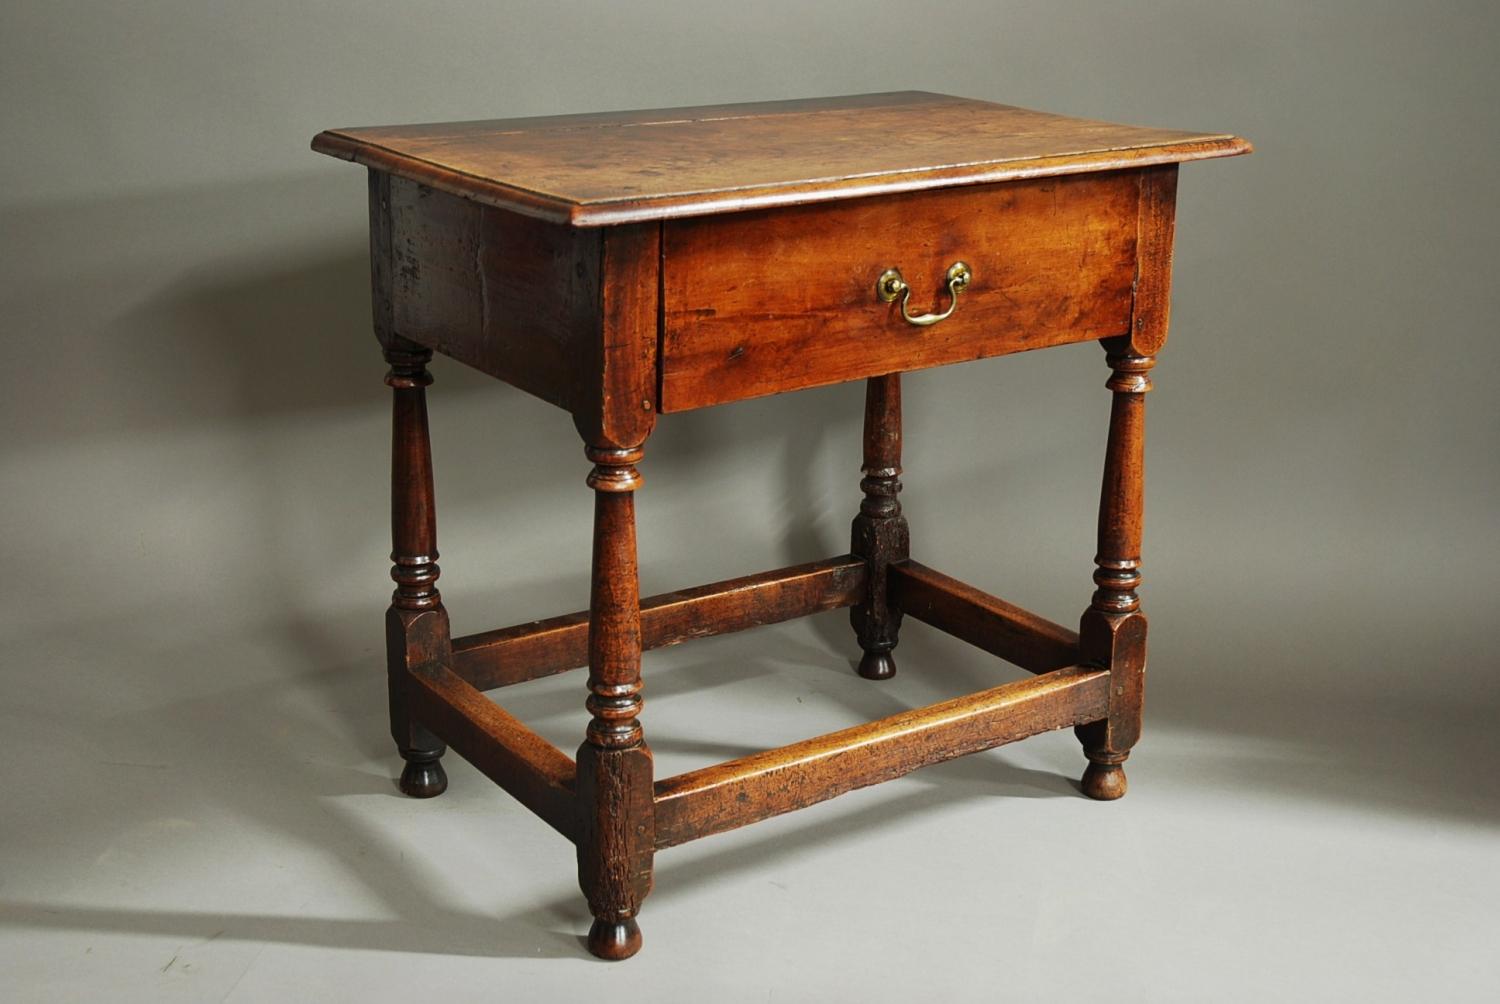 18th century cherry wood joined side table